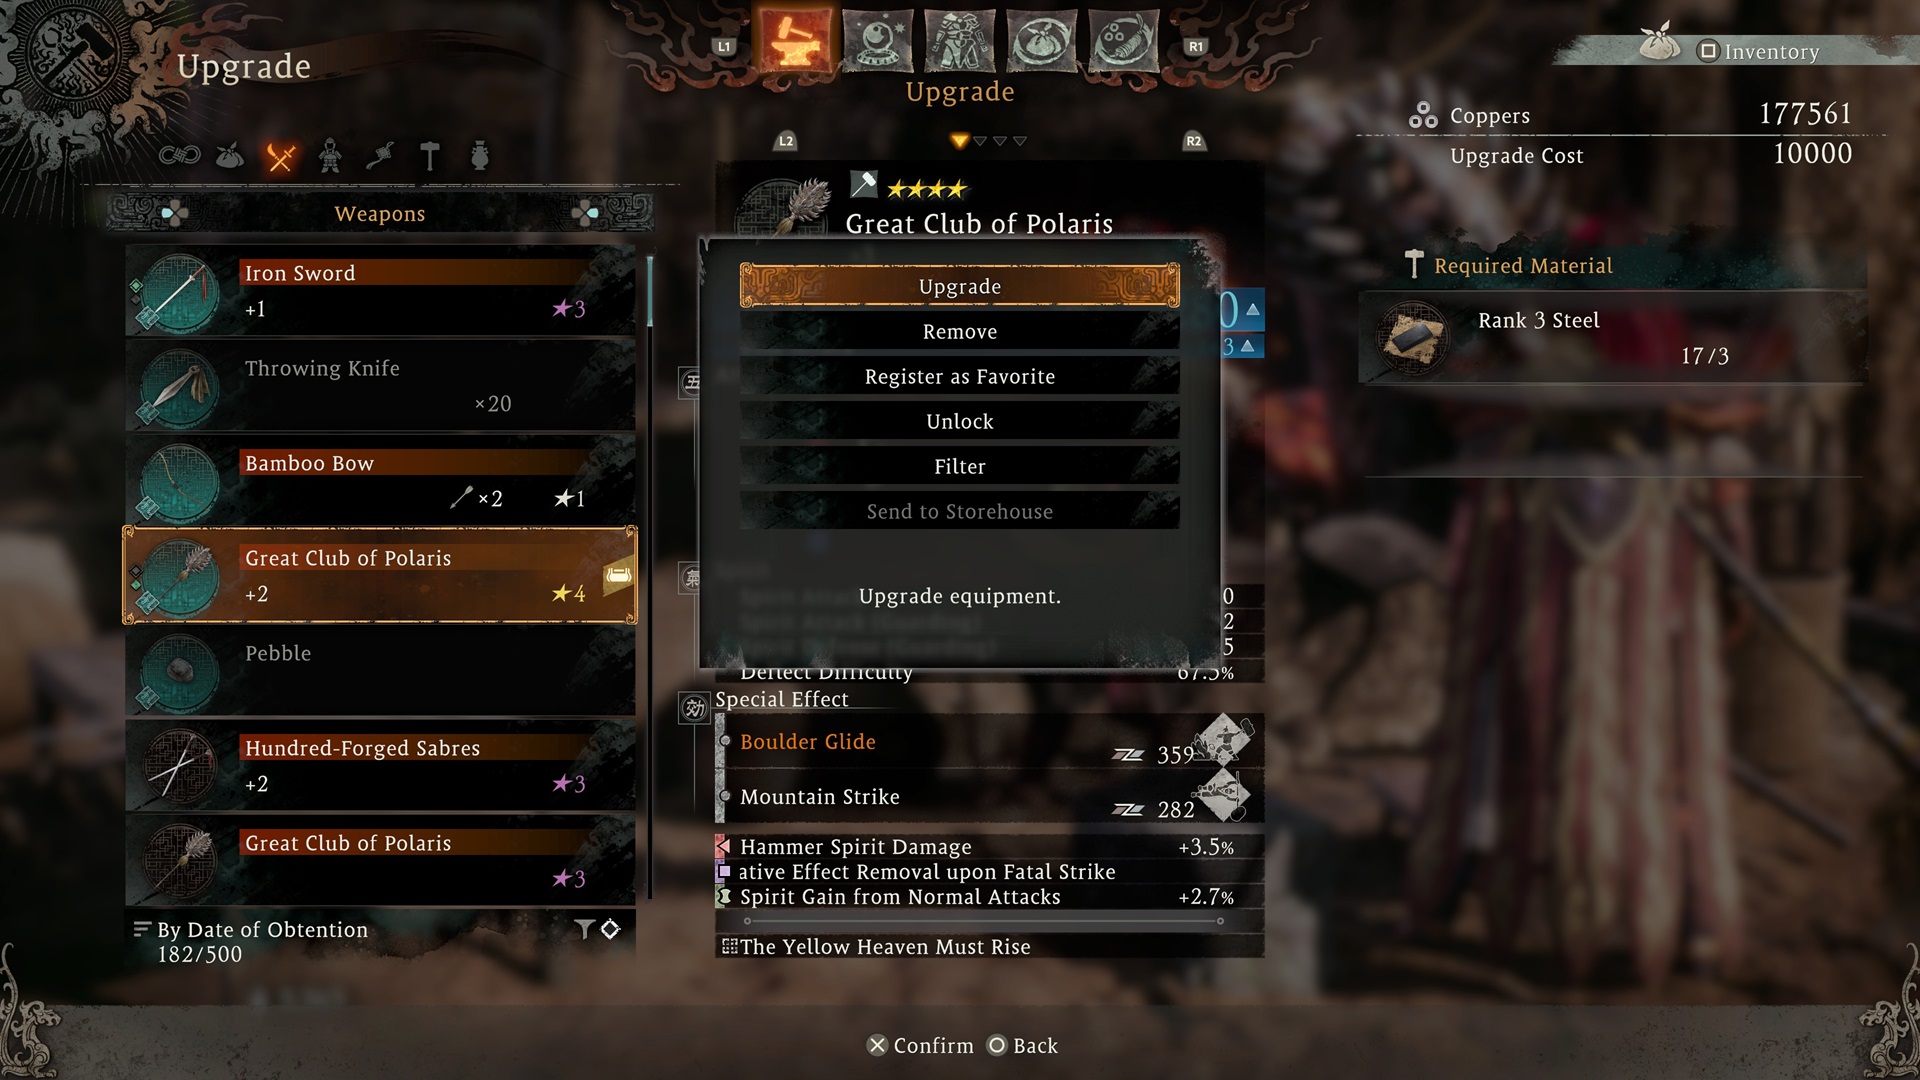 Wo Long Fallen Dynasty Blacksmith crafting upgrade weapons armors guide - 2